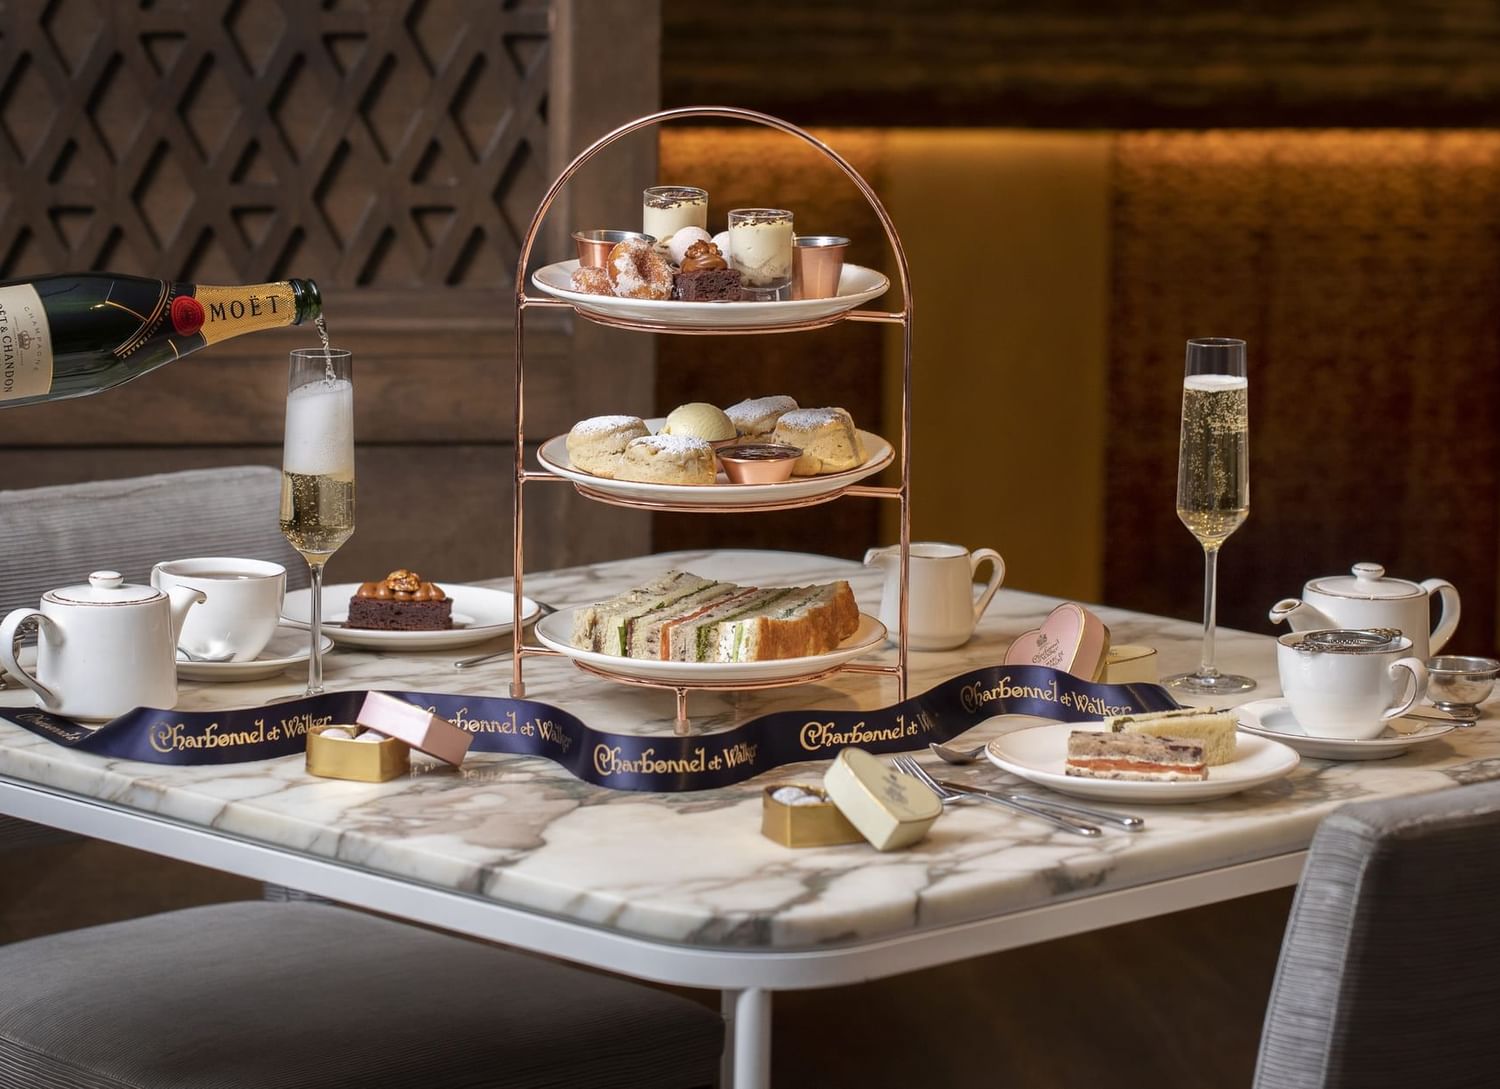 Afternoon tea curate stand with tasty treats, ceramic teapots, cups & champagne served at The May Fair Hotel, London